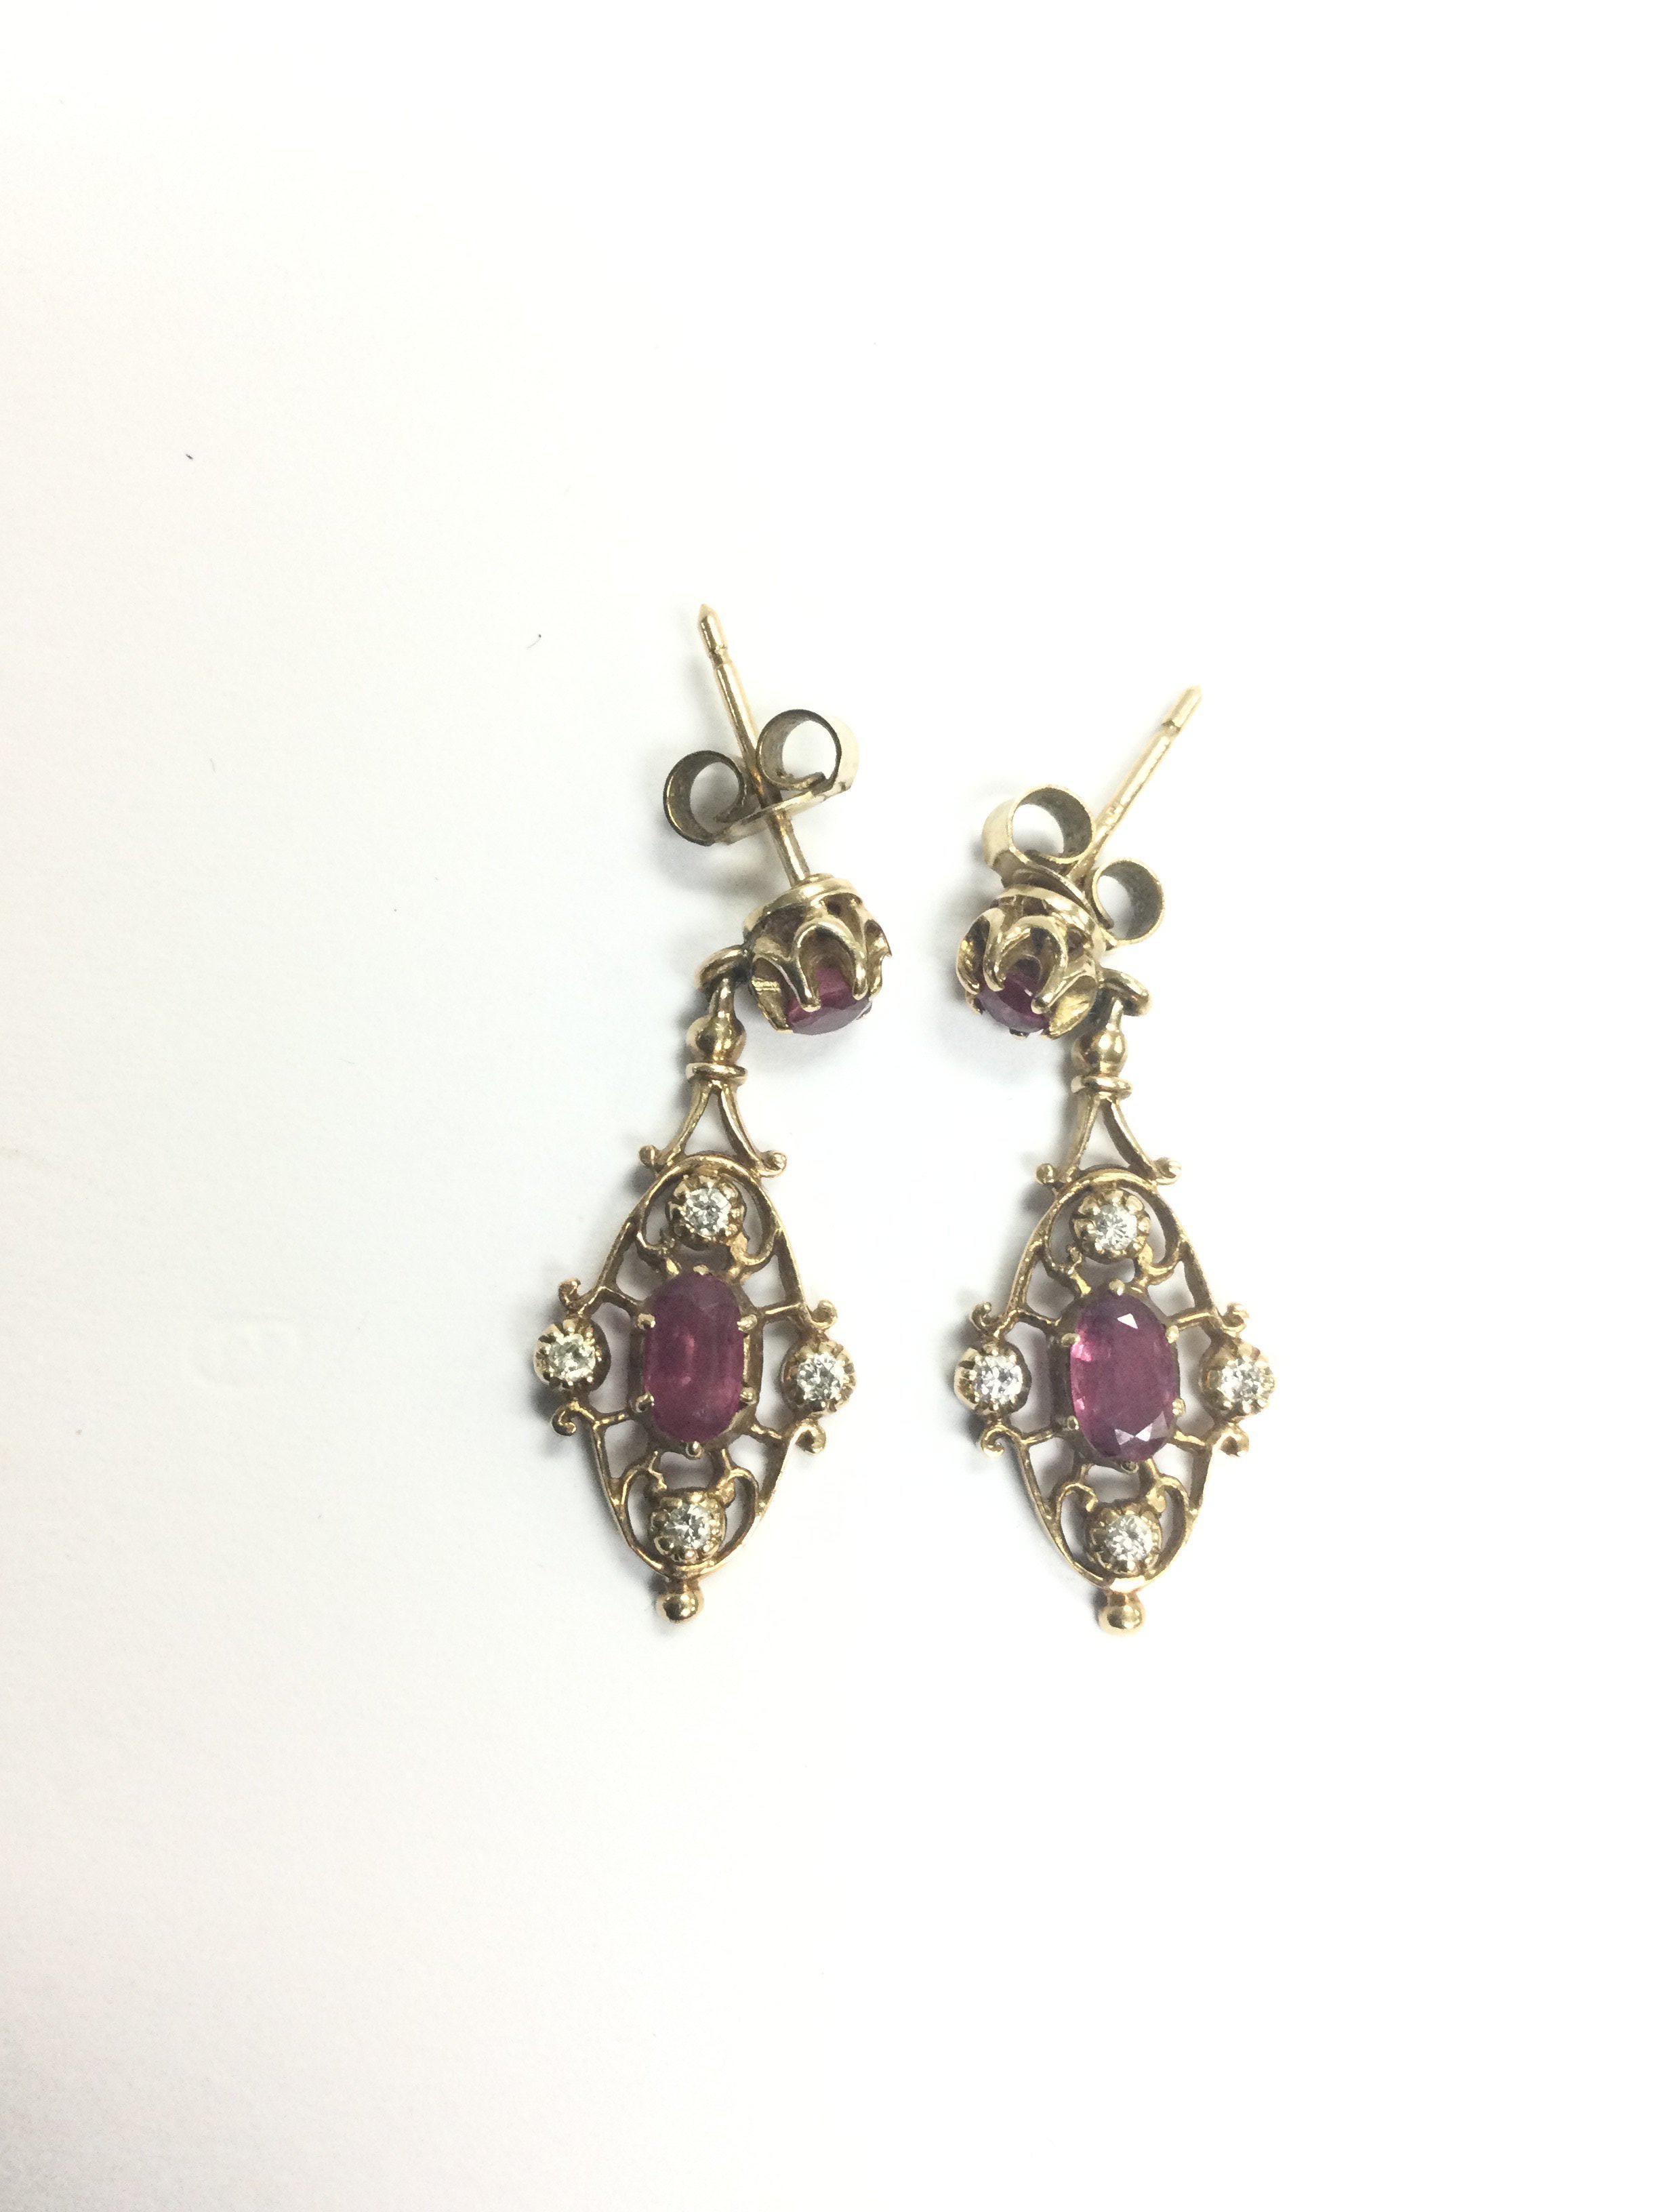 A pair of 9ct gold, diamond and ruby drop earrings